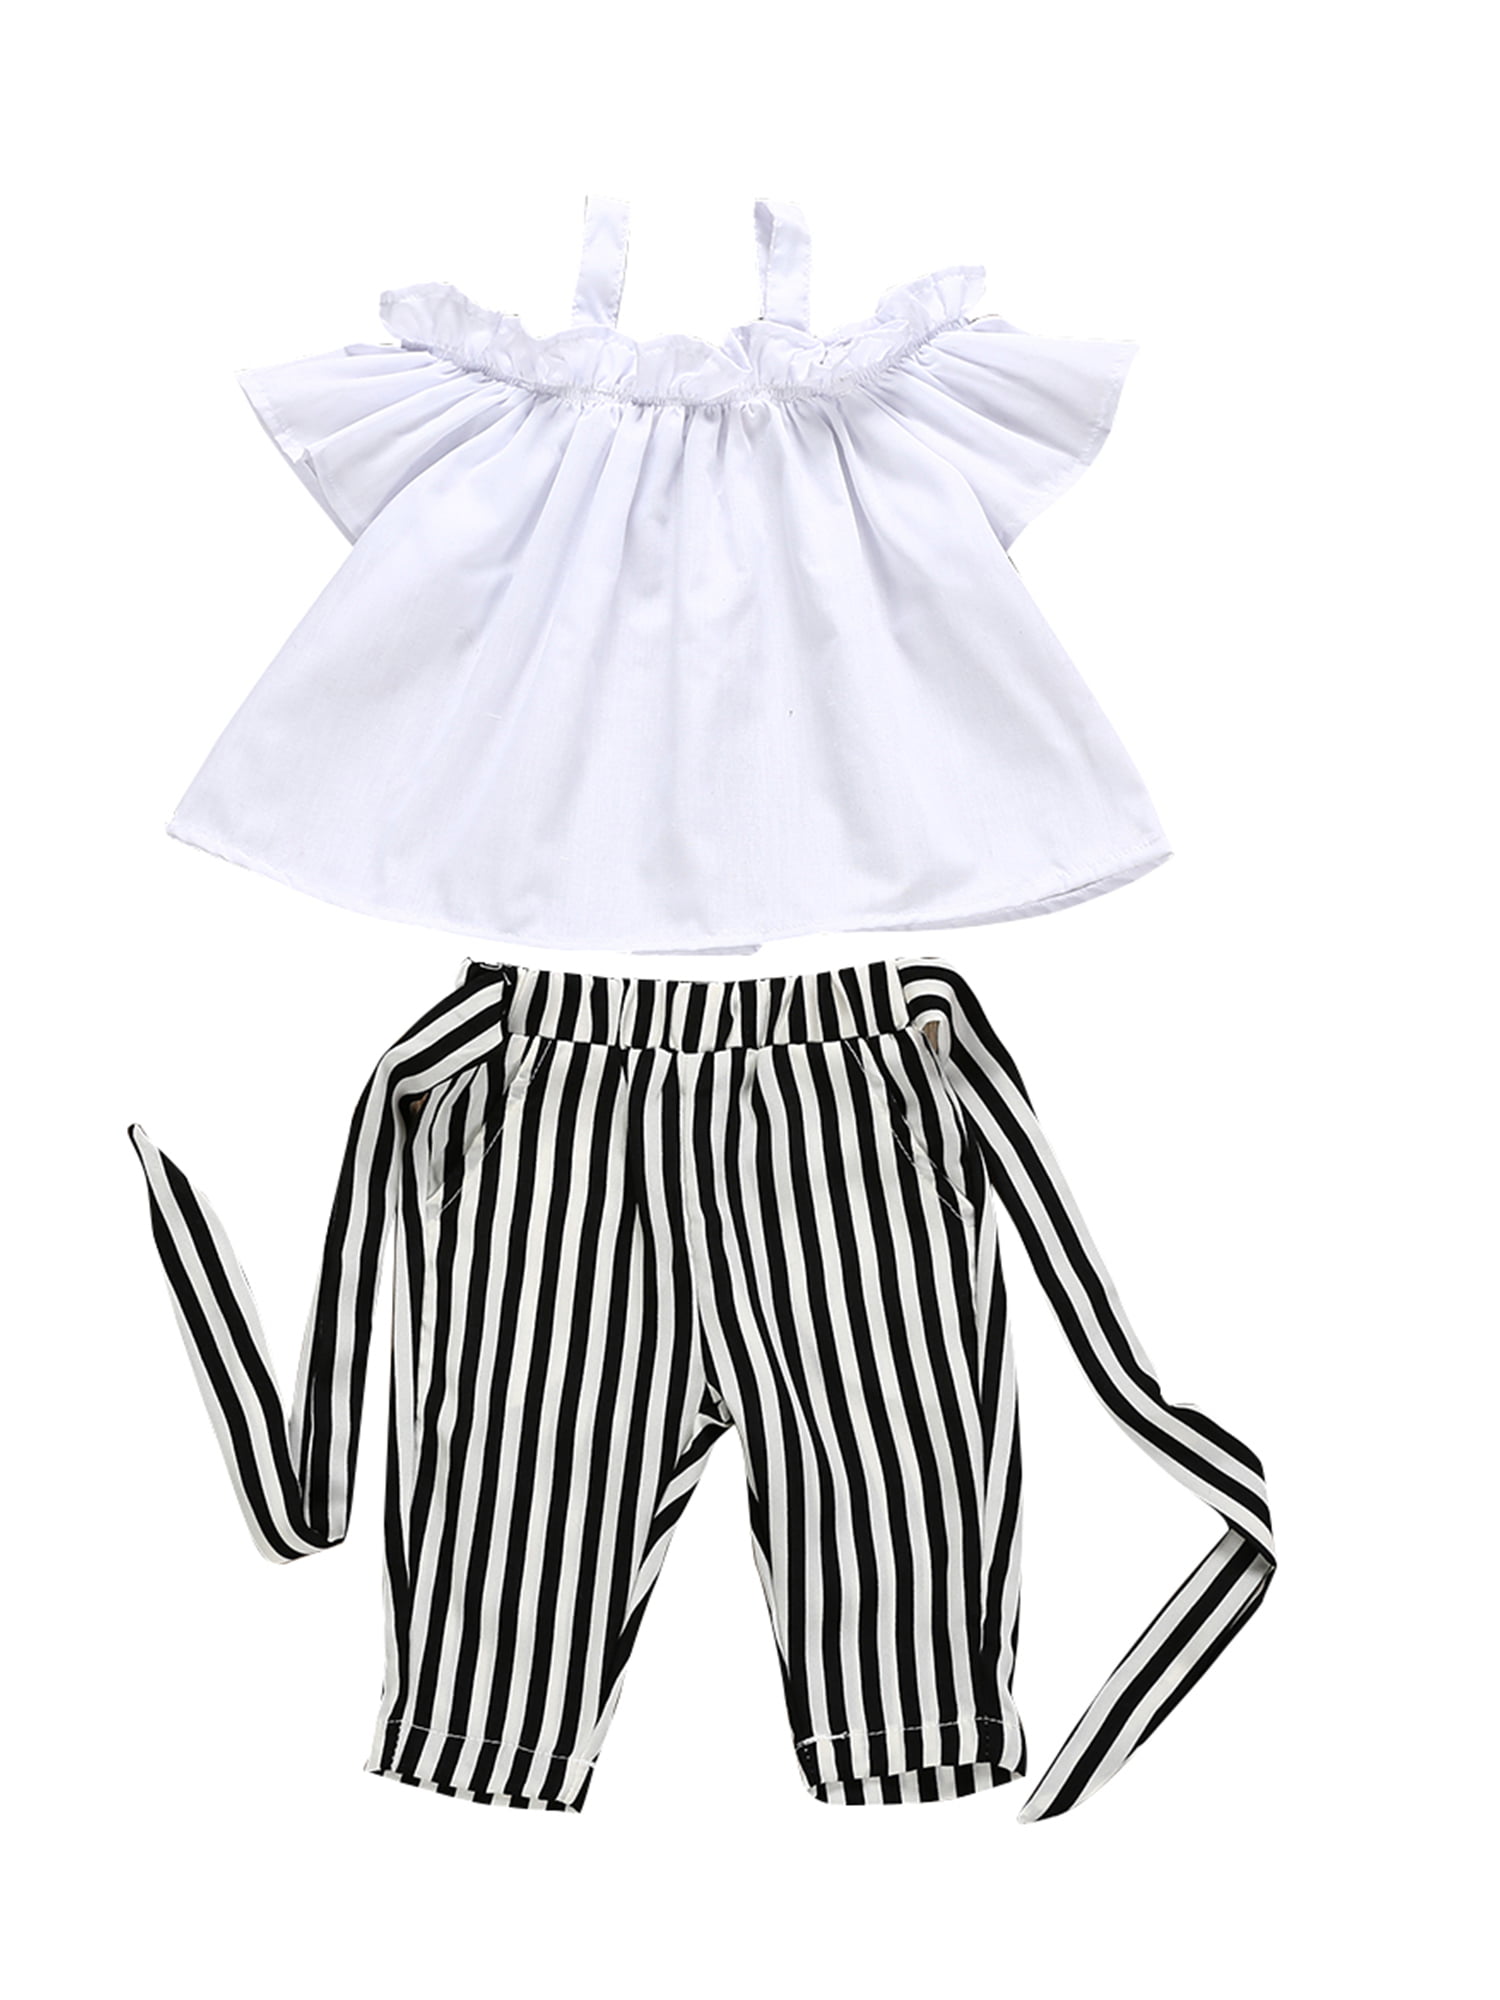 Details about   2Pcs Toddler Kids Baby Girls Outfits Stripe Bow Tops Pants Clothes Sets Fashion 